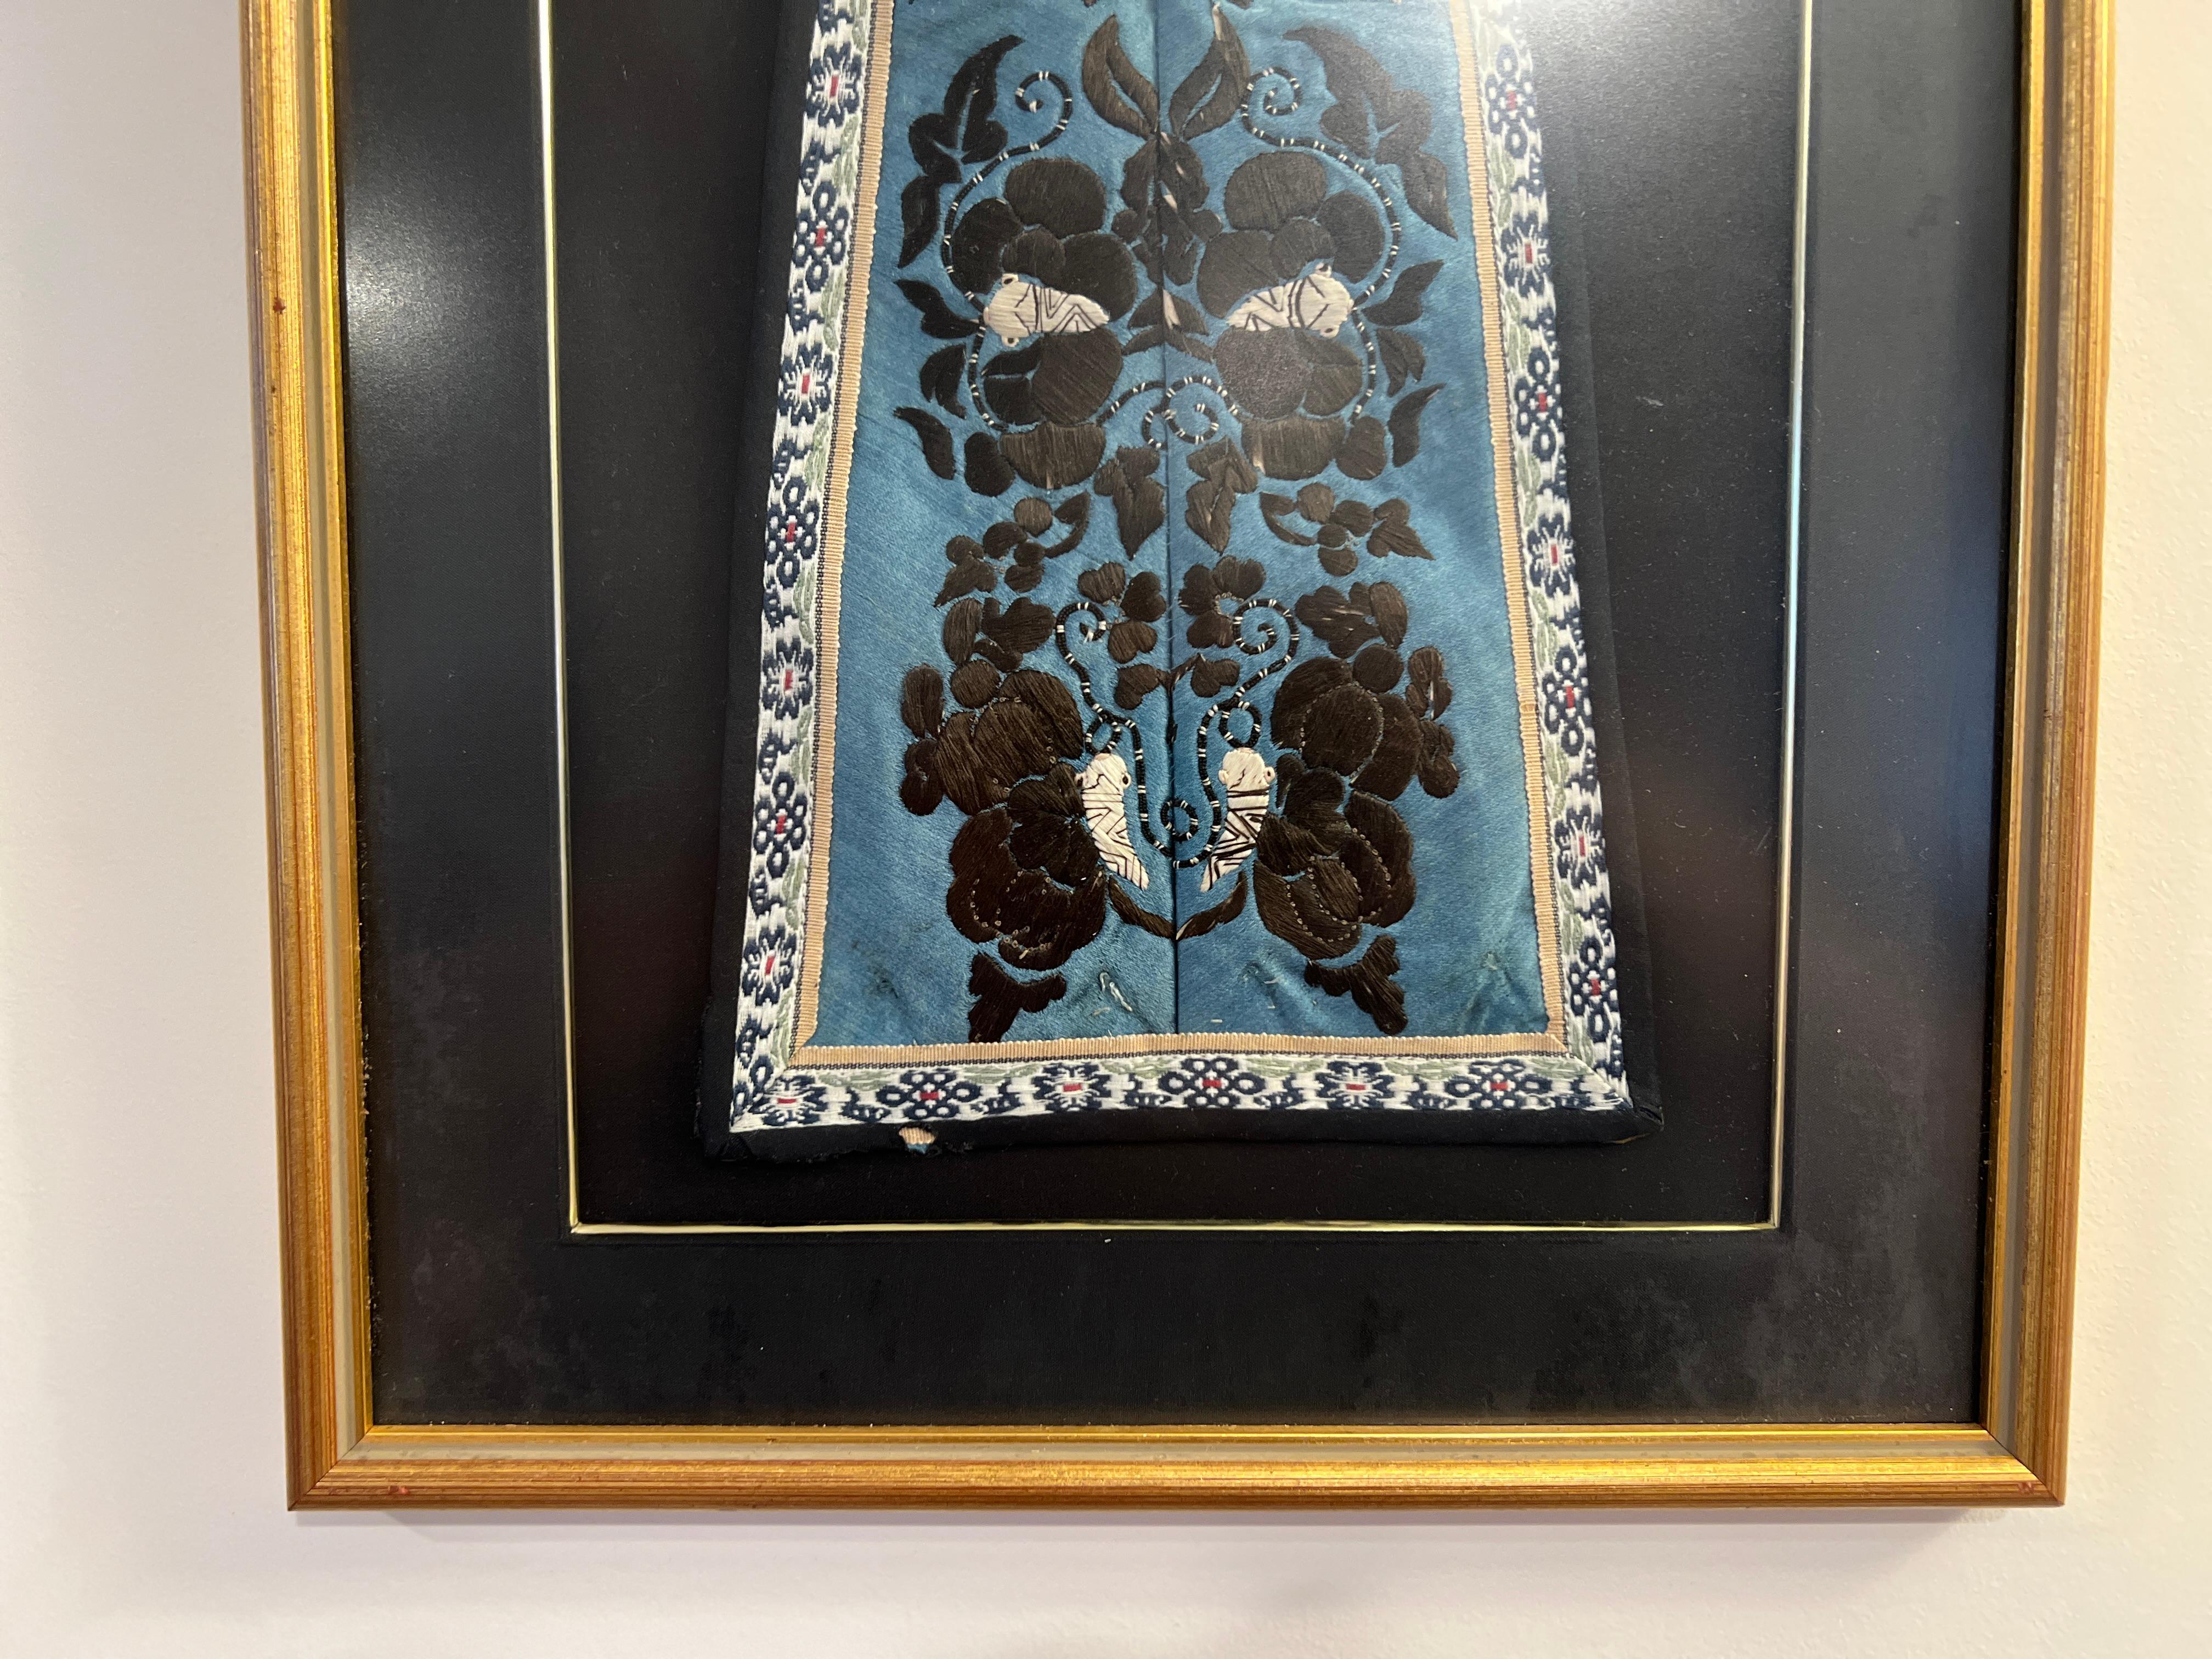 Chinese Qing Dynasty (1644-1911), 19th century. 

Step into the lavish world of the Qing Dynasty with this exquisite antique Chinese silk embroidery Manchurian robe panel. Embellished with a graceful butterfly motif, this panel reflects the elegance